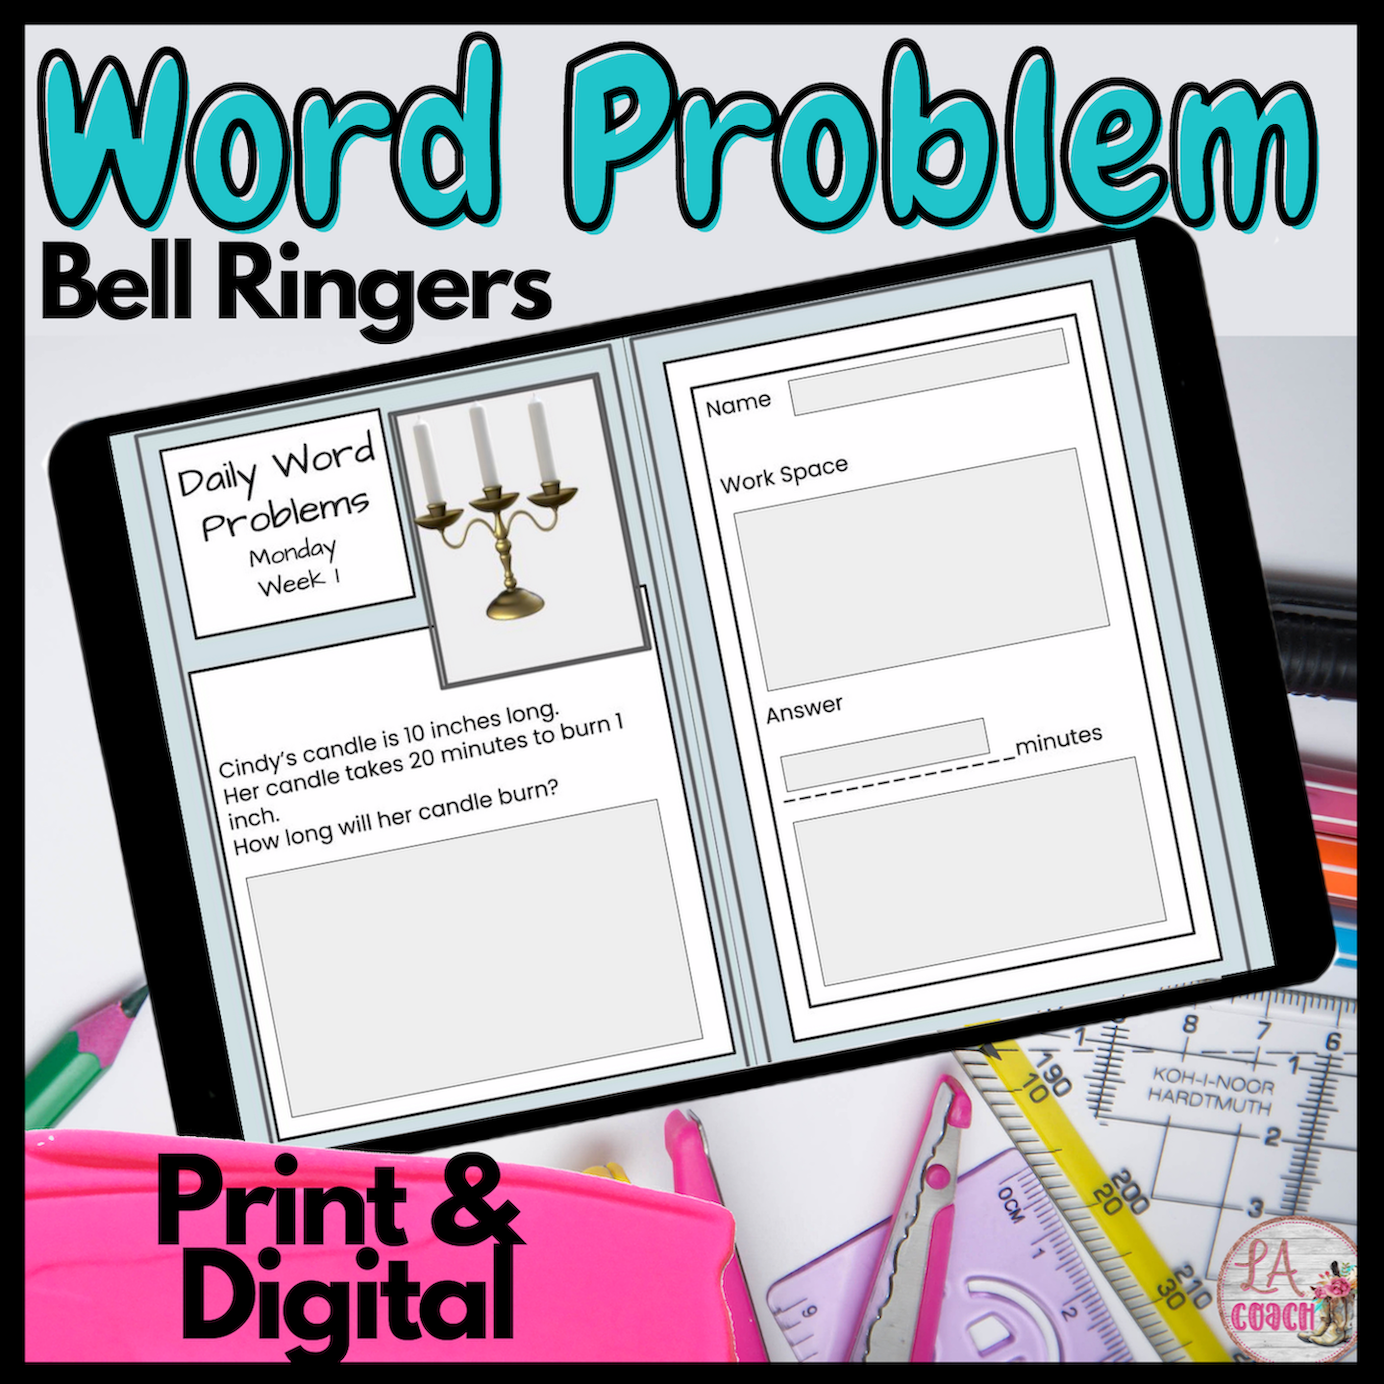 Bell Ringers for Math Word Problems